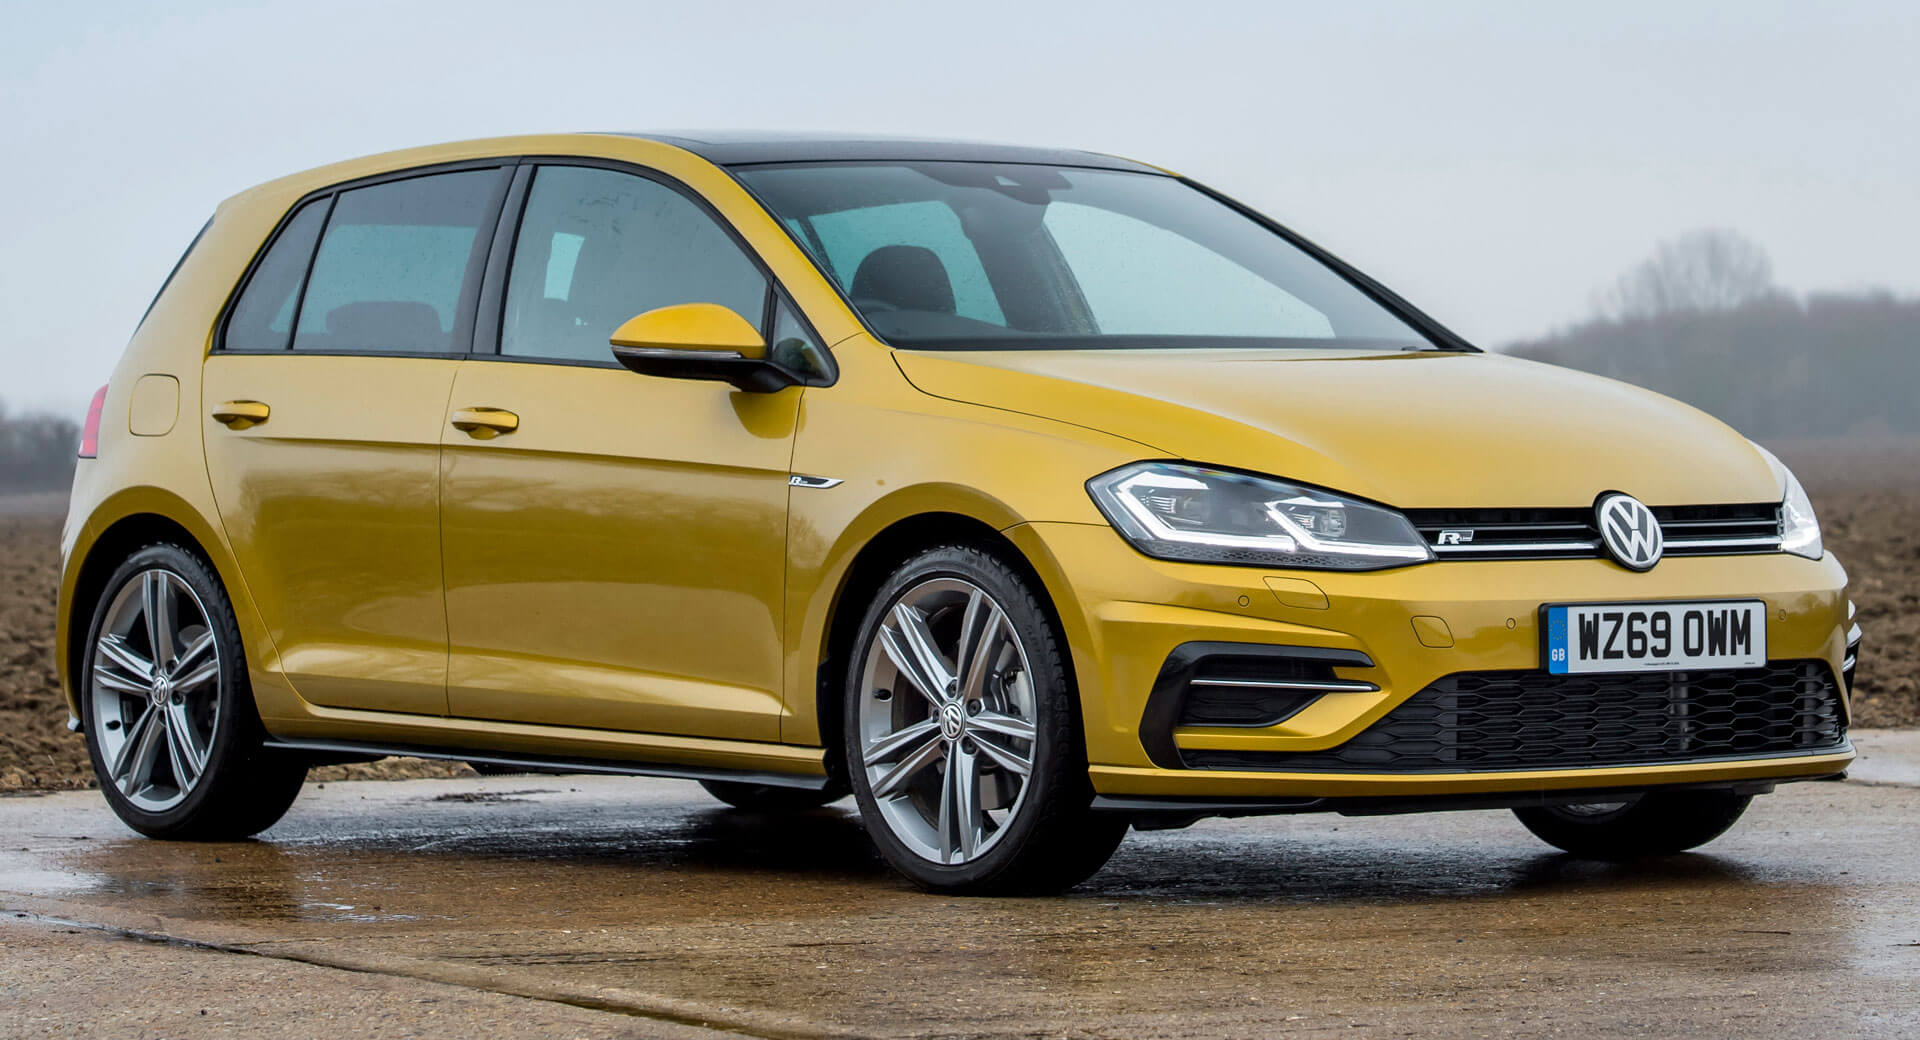 New VW Golf Edition Models Announce The Demise Of The Mk7 ...